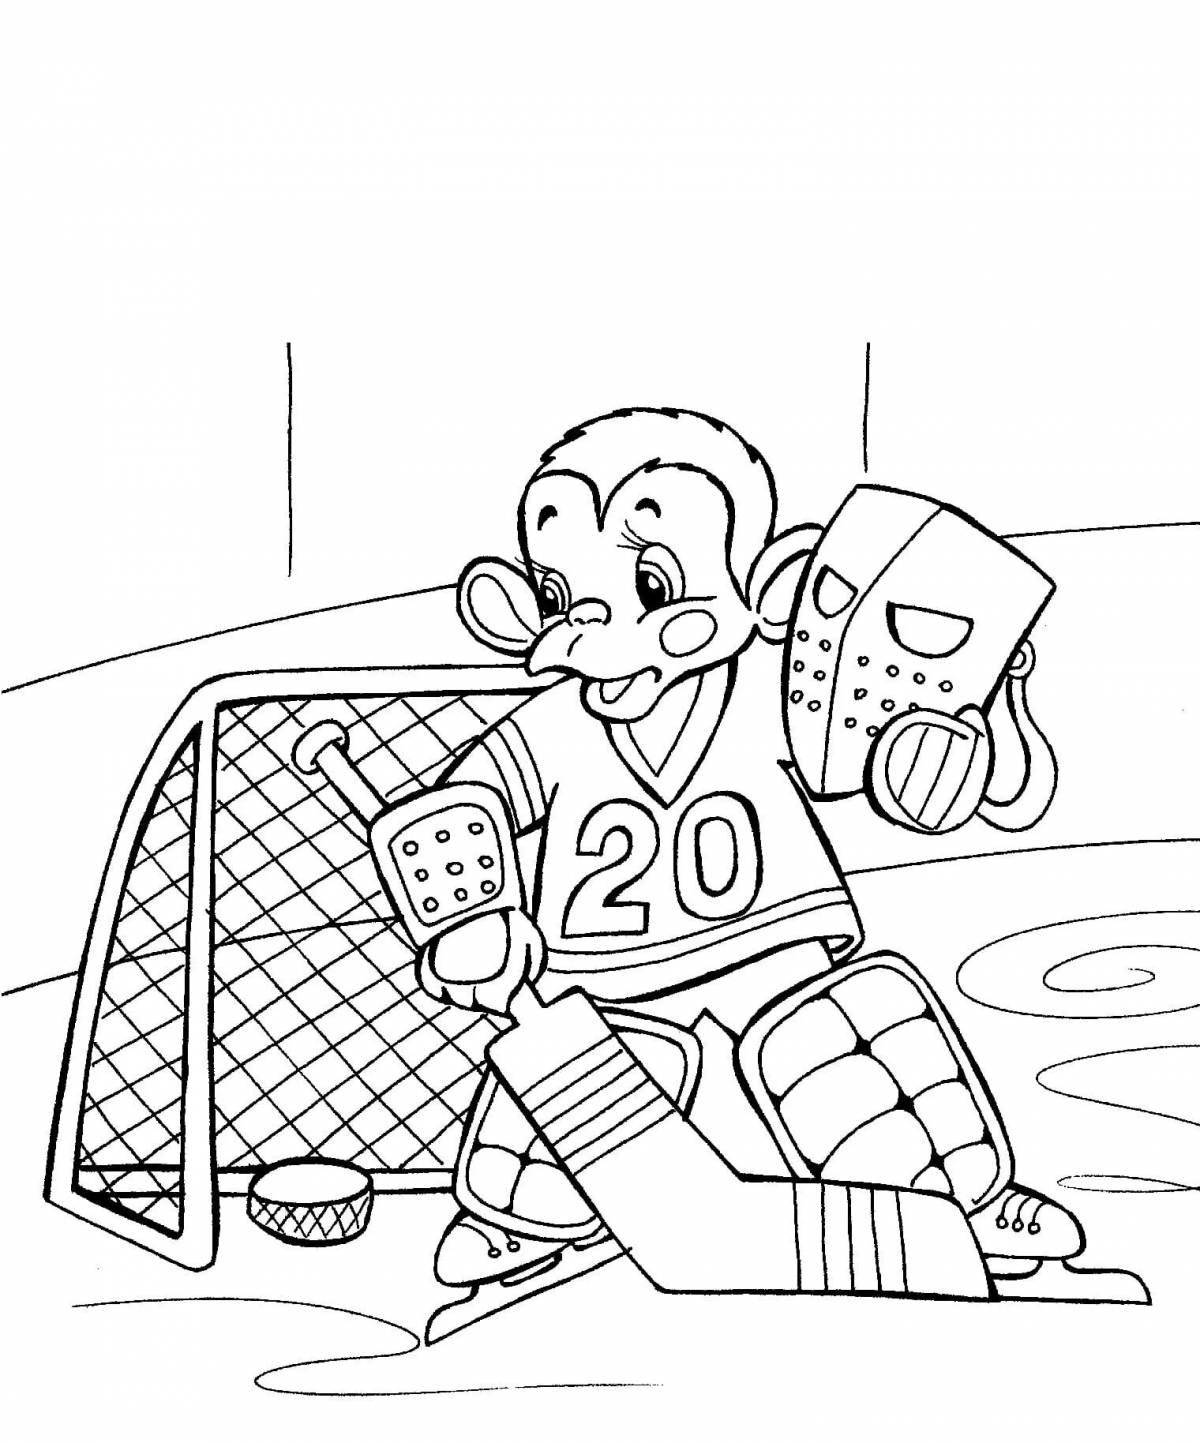 Hockey goalkeeper coloring page